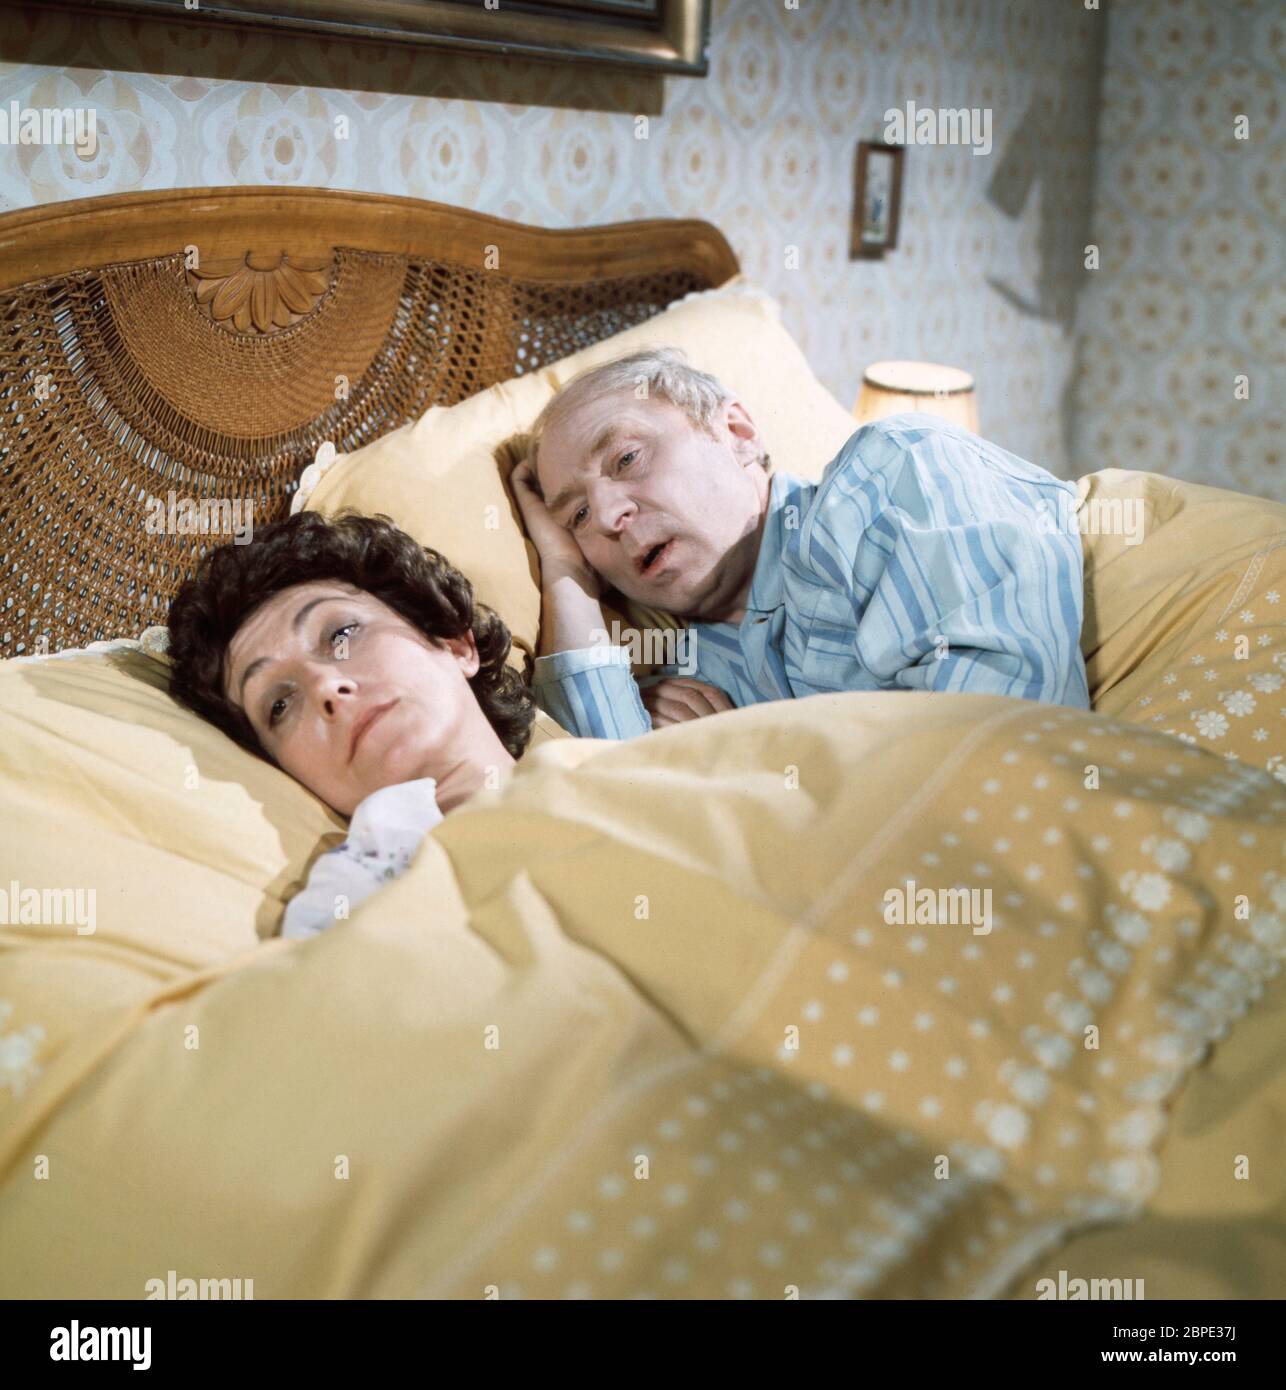 Das Bett High Resolution Stock Photography and Images - Alamy